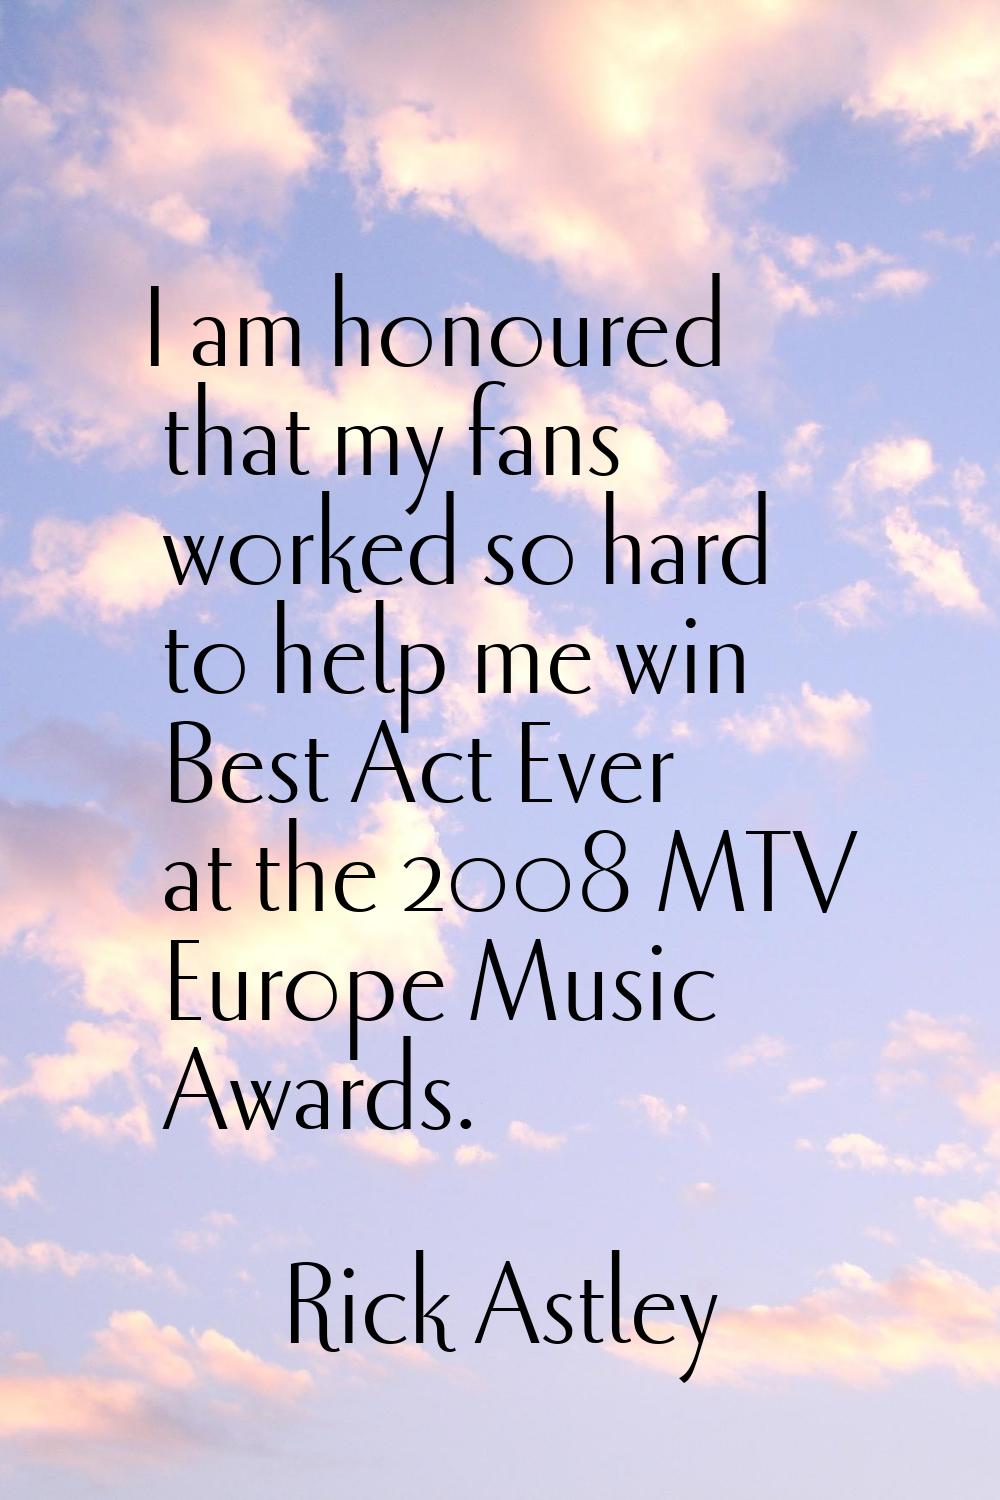 I am honoured that my fans worked so hard to help me win Best Act Ever at the 2008 MTV Europe Music